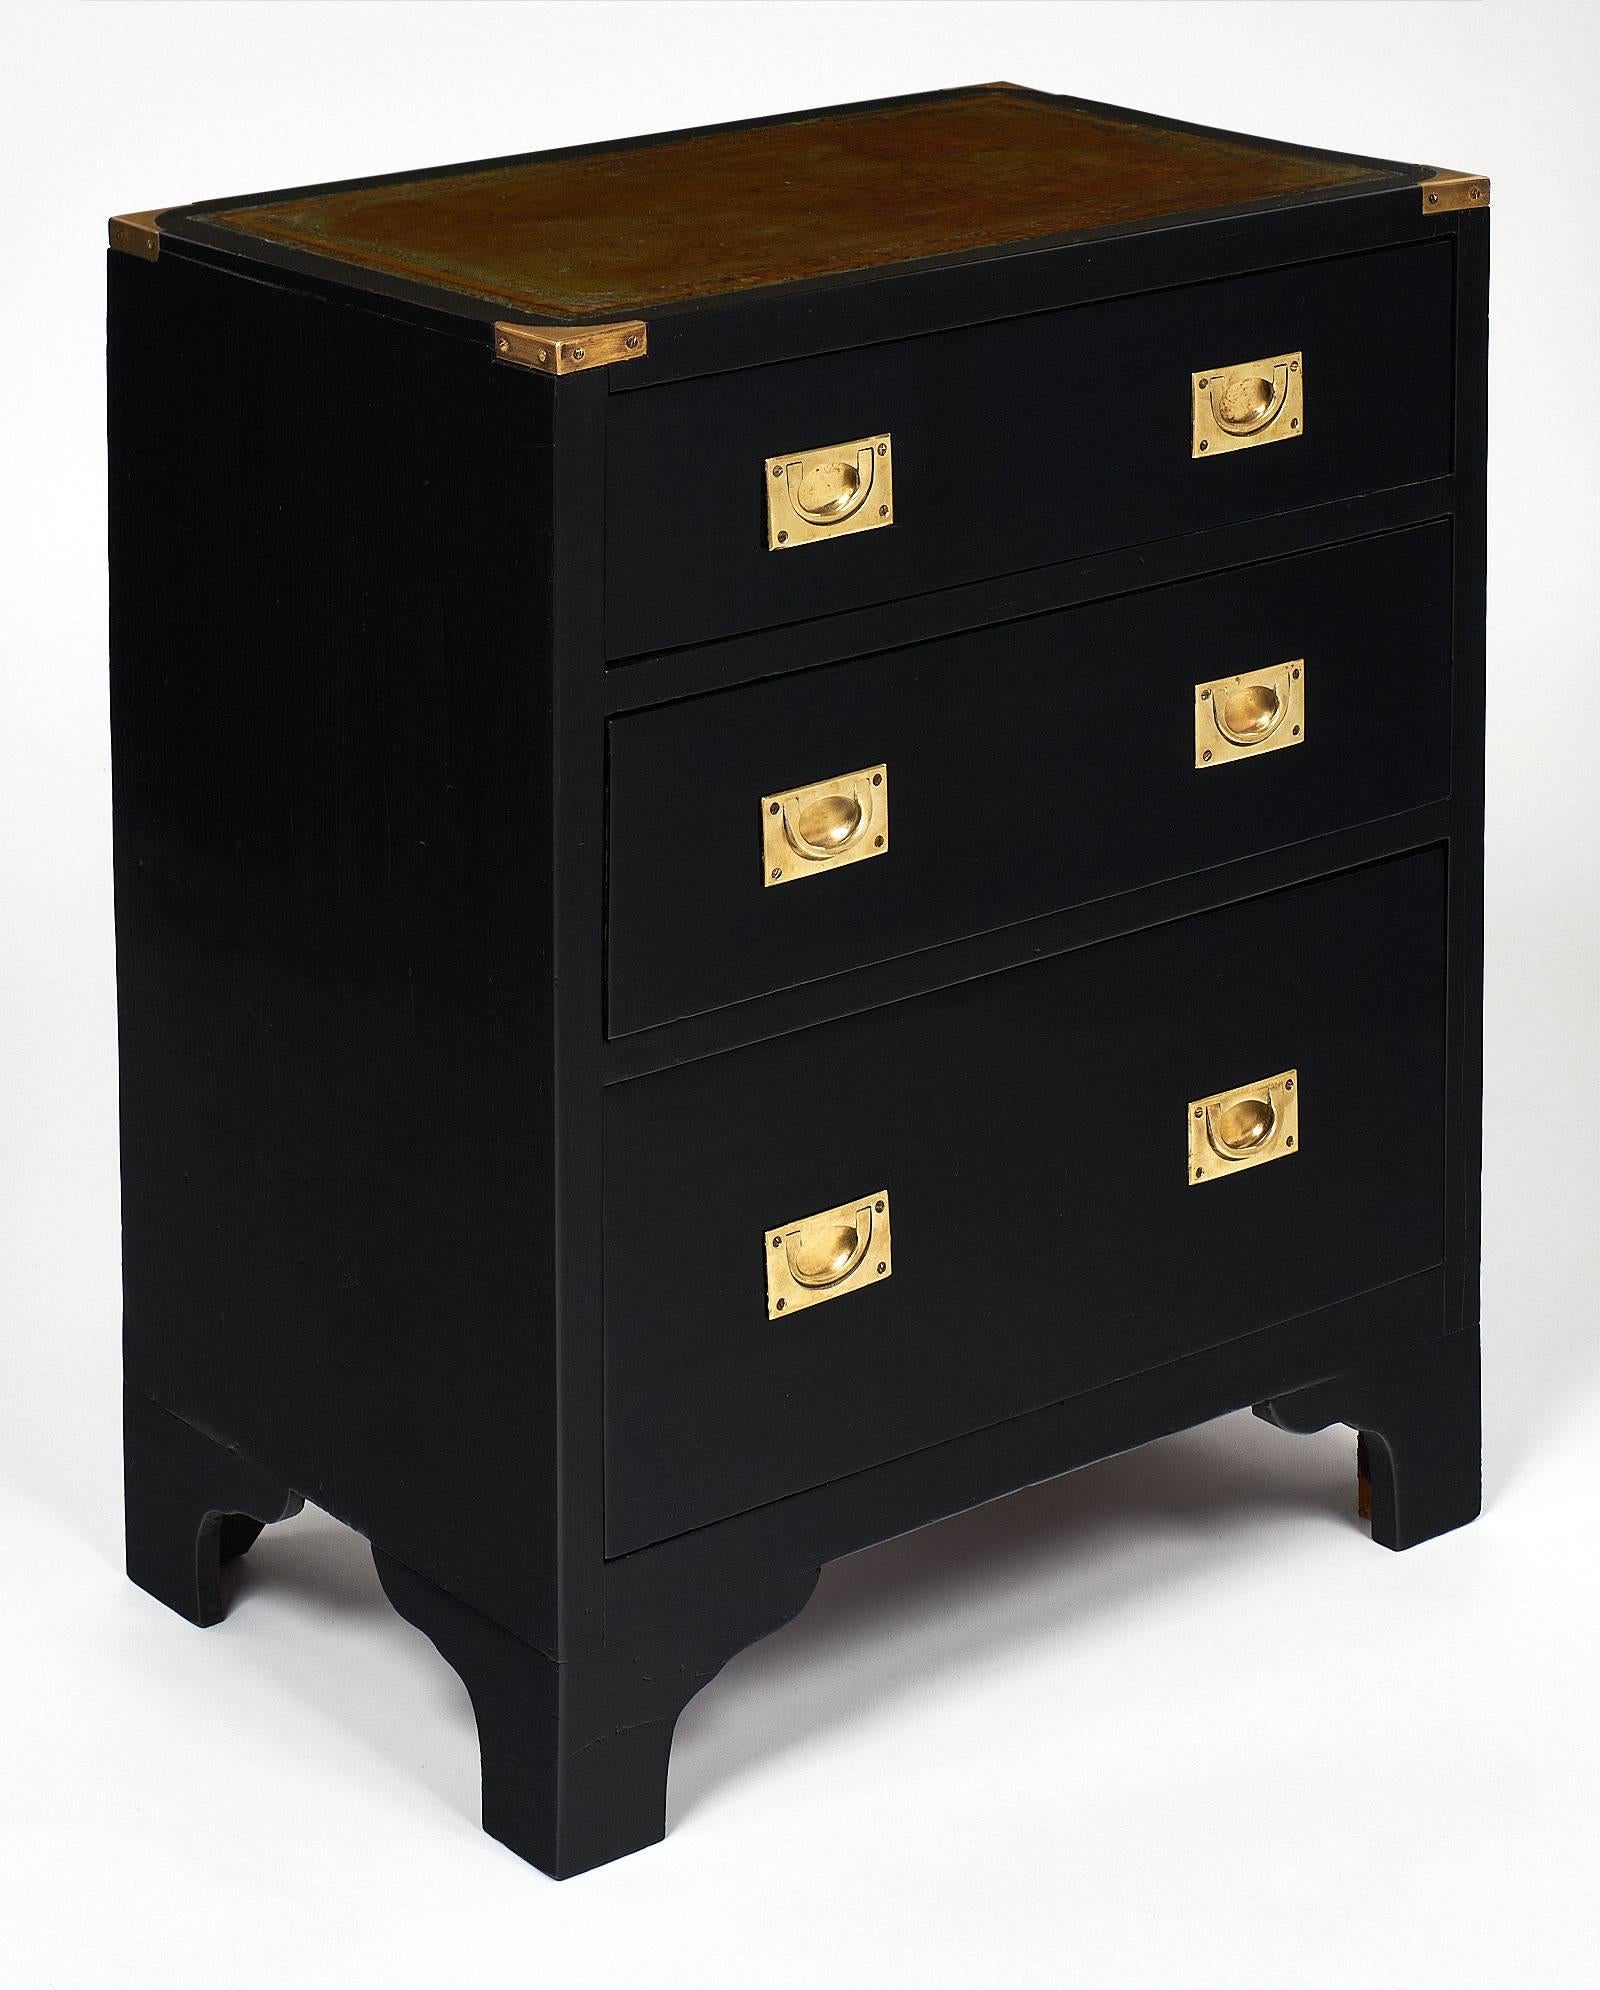 An antique English campaign chest of drawers of ebonized and French polished mahogany, oak as a secondary wood. This piece has three dovetailed drawers with two solid inserted gilt brass handles on each. The top is green Moroccan leather with gold